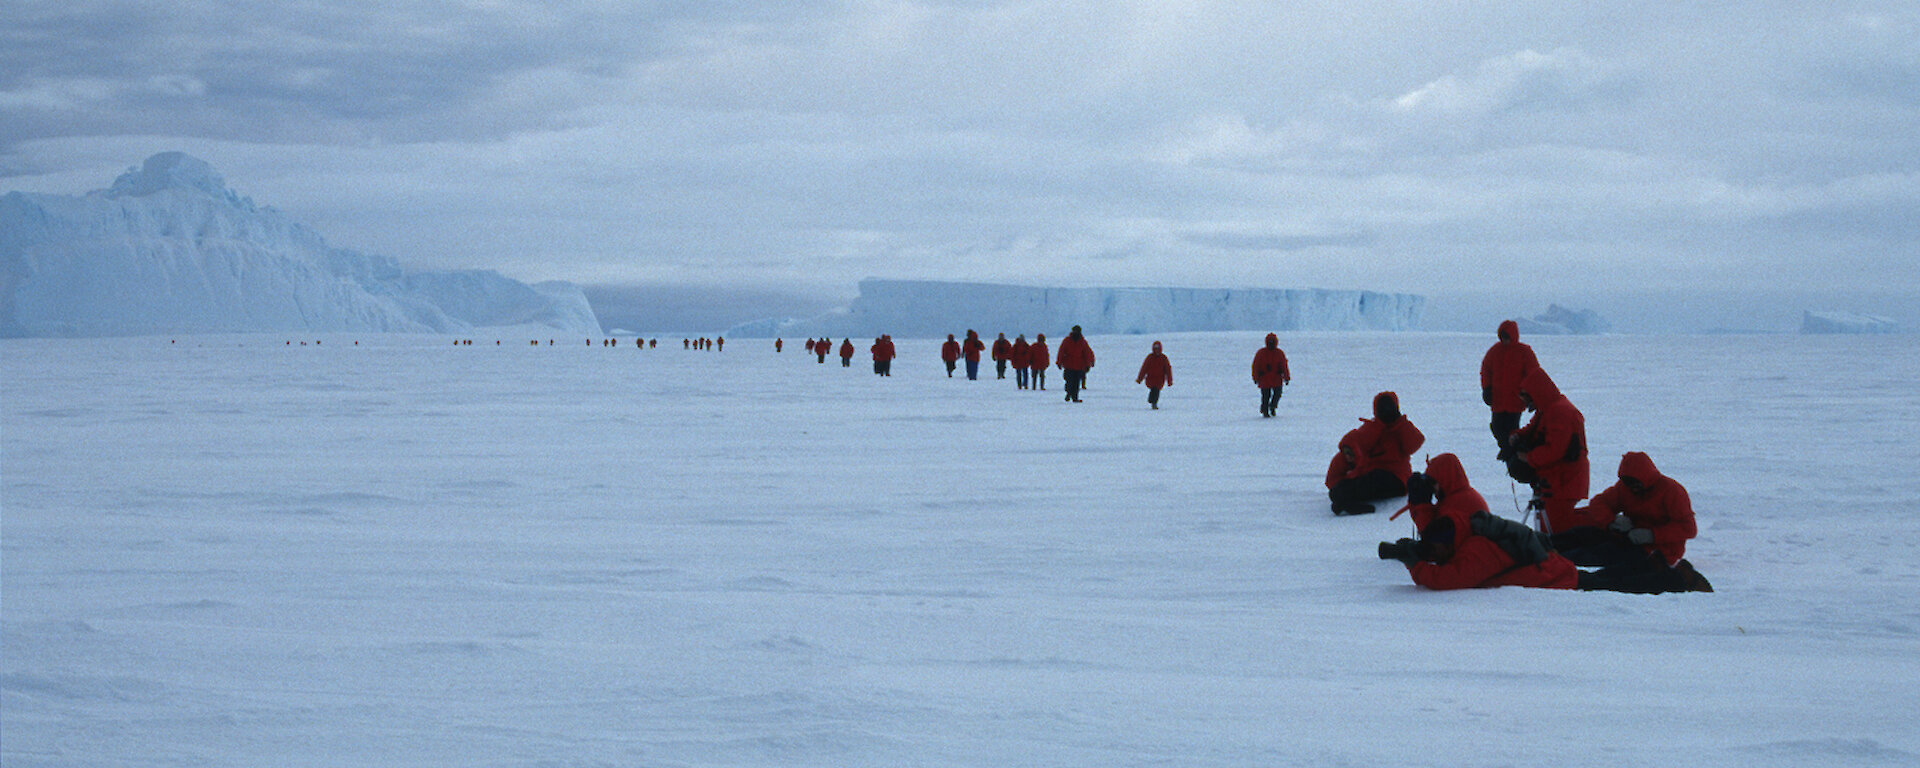 With nothing but white visible, and tall glaciers either side, a line of tourists wearing similar coats walk into the distance.